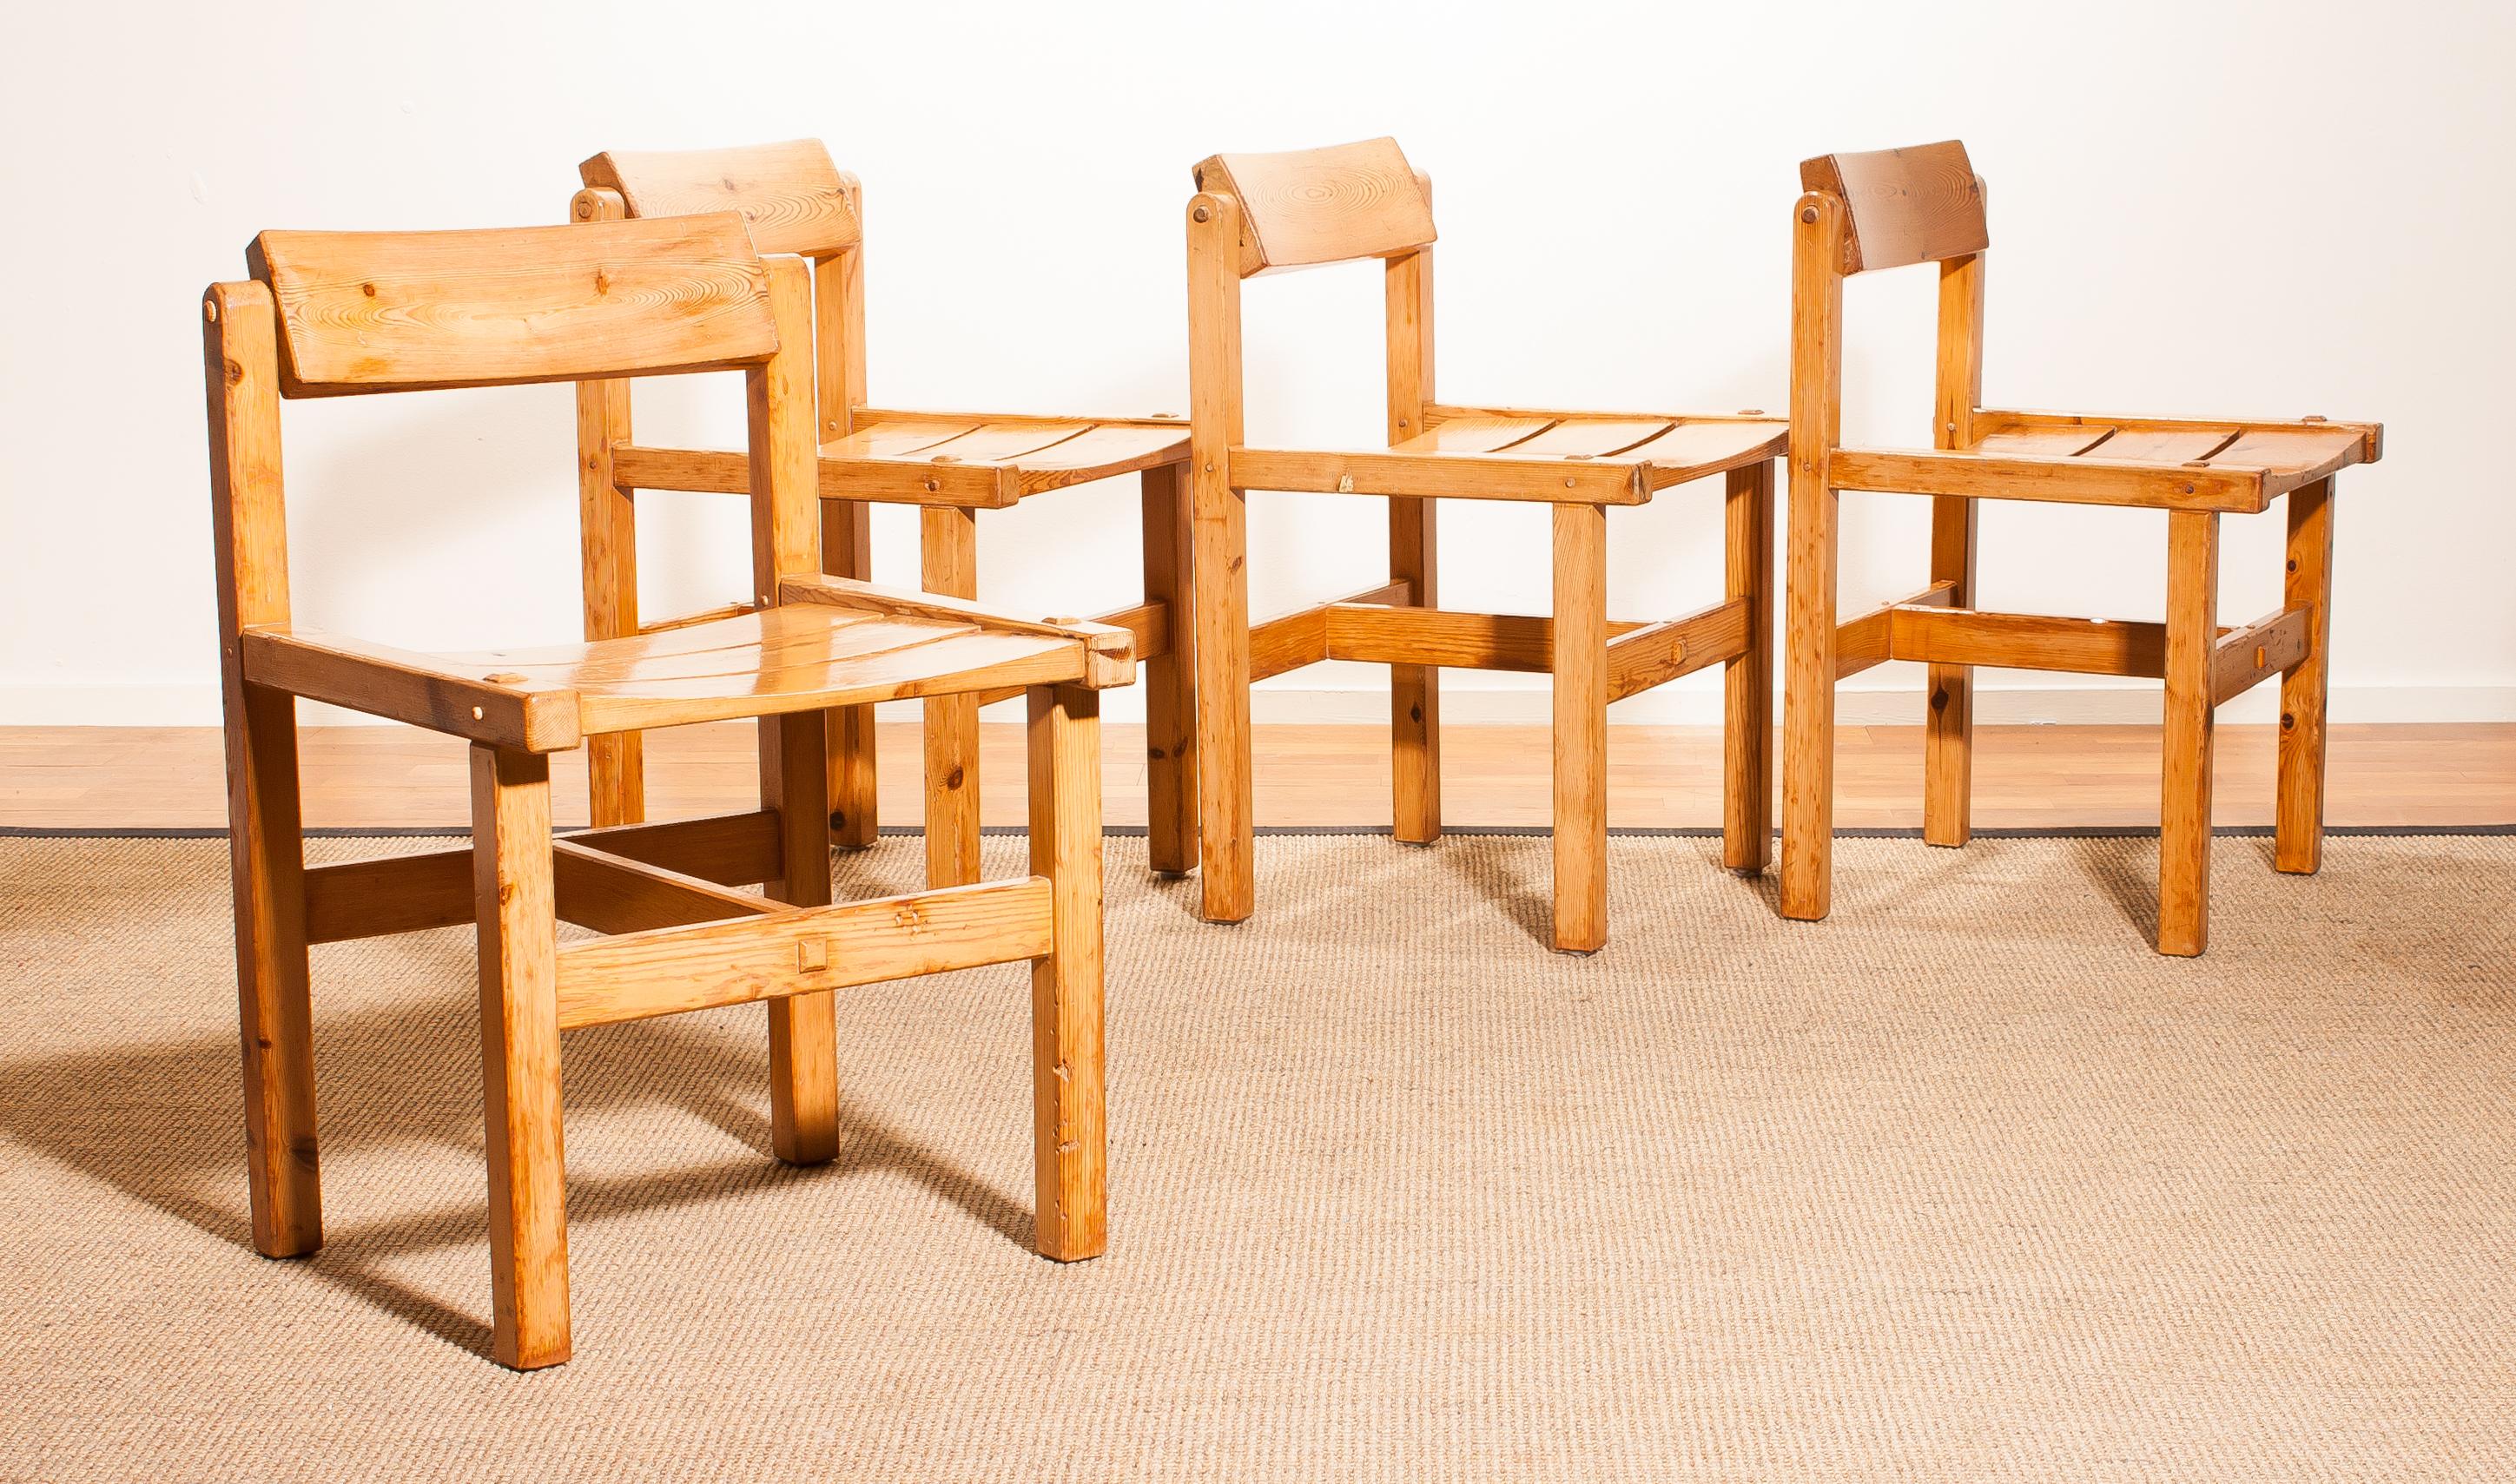 Very nice set of four chairs designed by Edvin Helseth.
These chairs are made of pine and they have turn able backrests.
They are in a beautiful used condition.
Period 1960s.
Dimensions: H 74 cm, W 47 cm, D 41 cm, SH 47 cm.